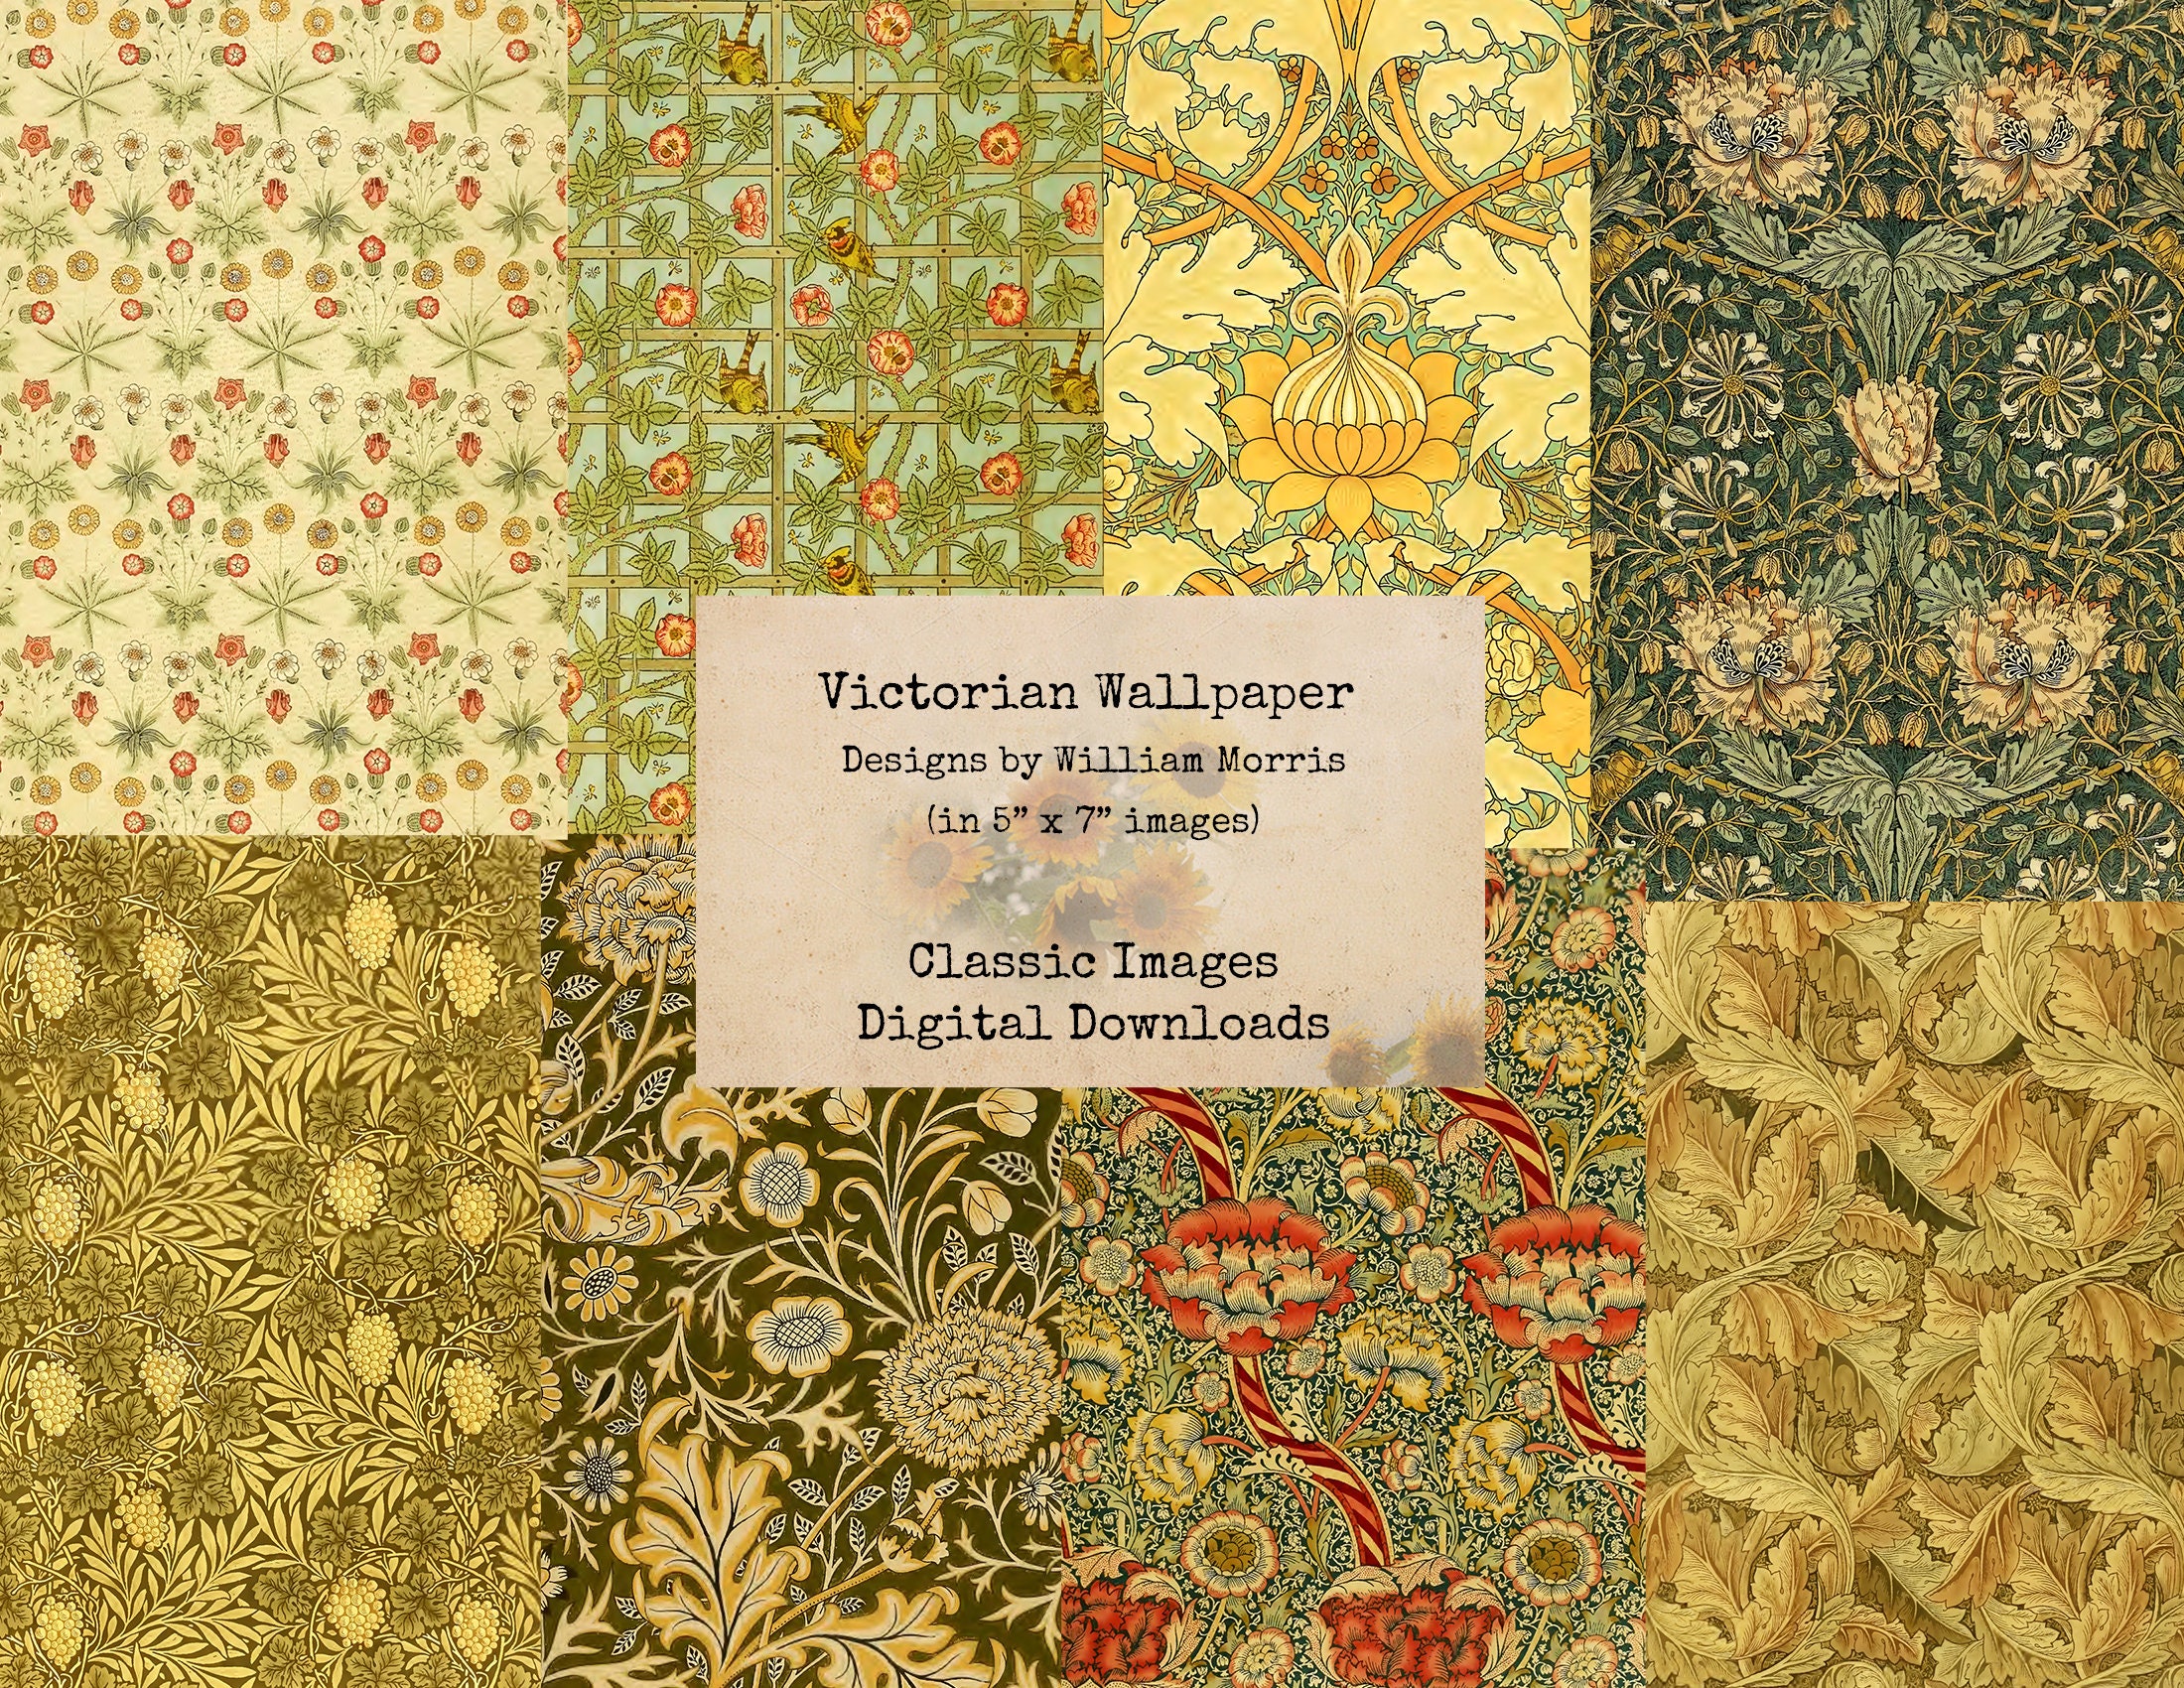 The William Morris Oeuvre Why the OnceRadical Designs Continue to  Intrigue  Architectural Digest